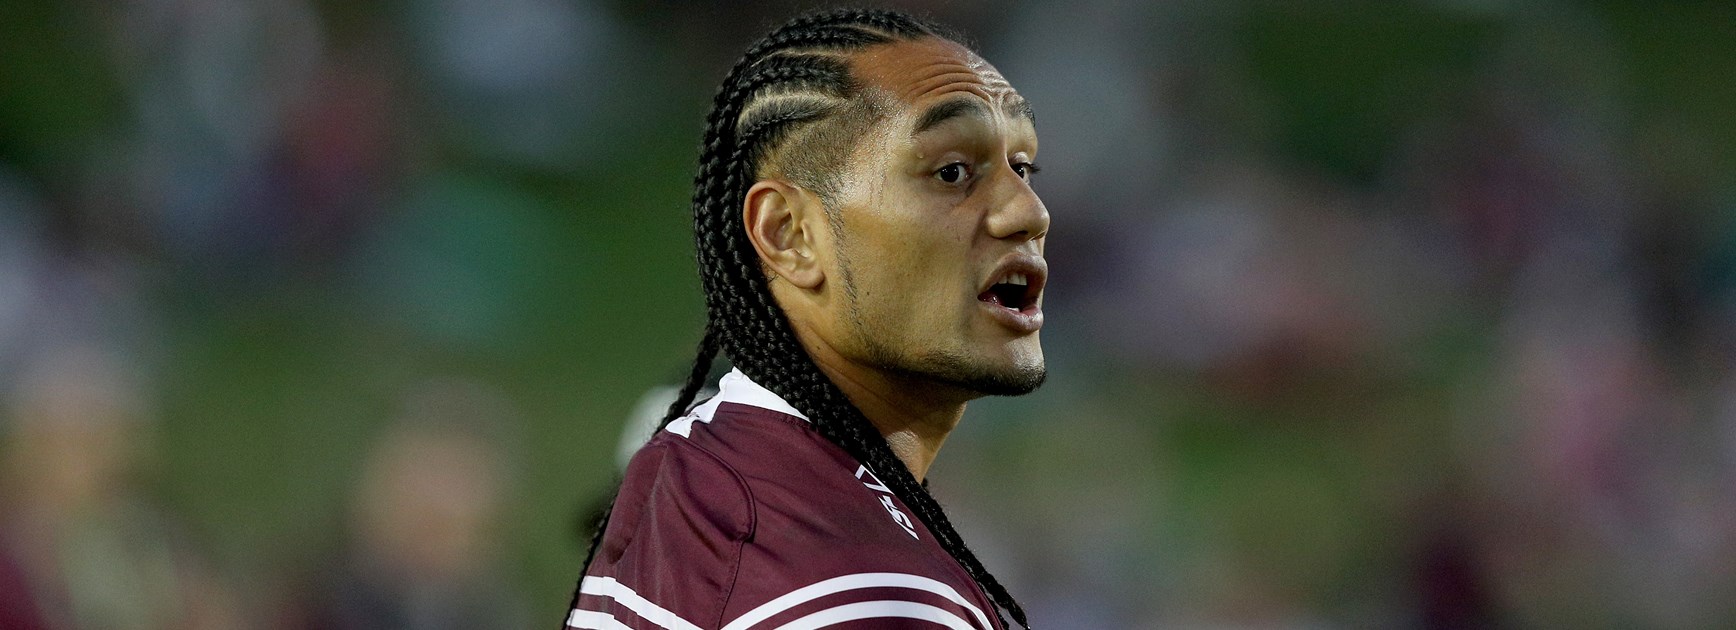 Taupau felt like 'zoo animal' in previous contract discussions